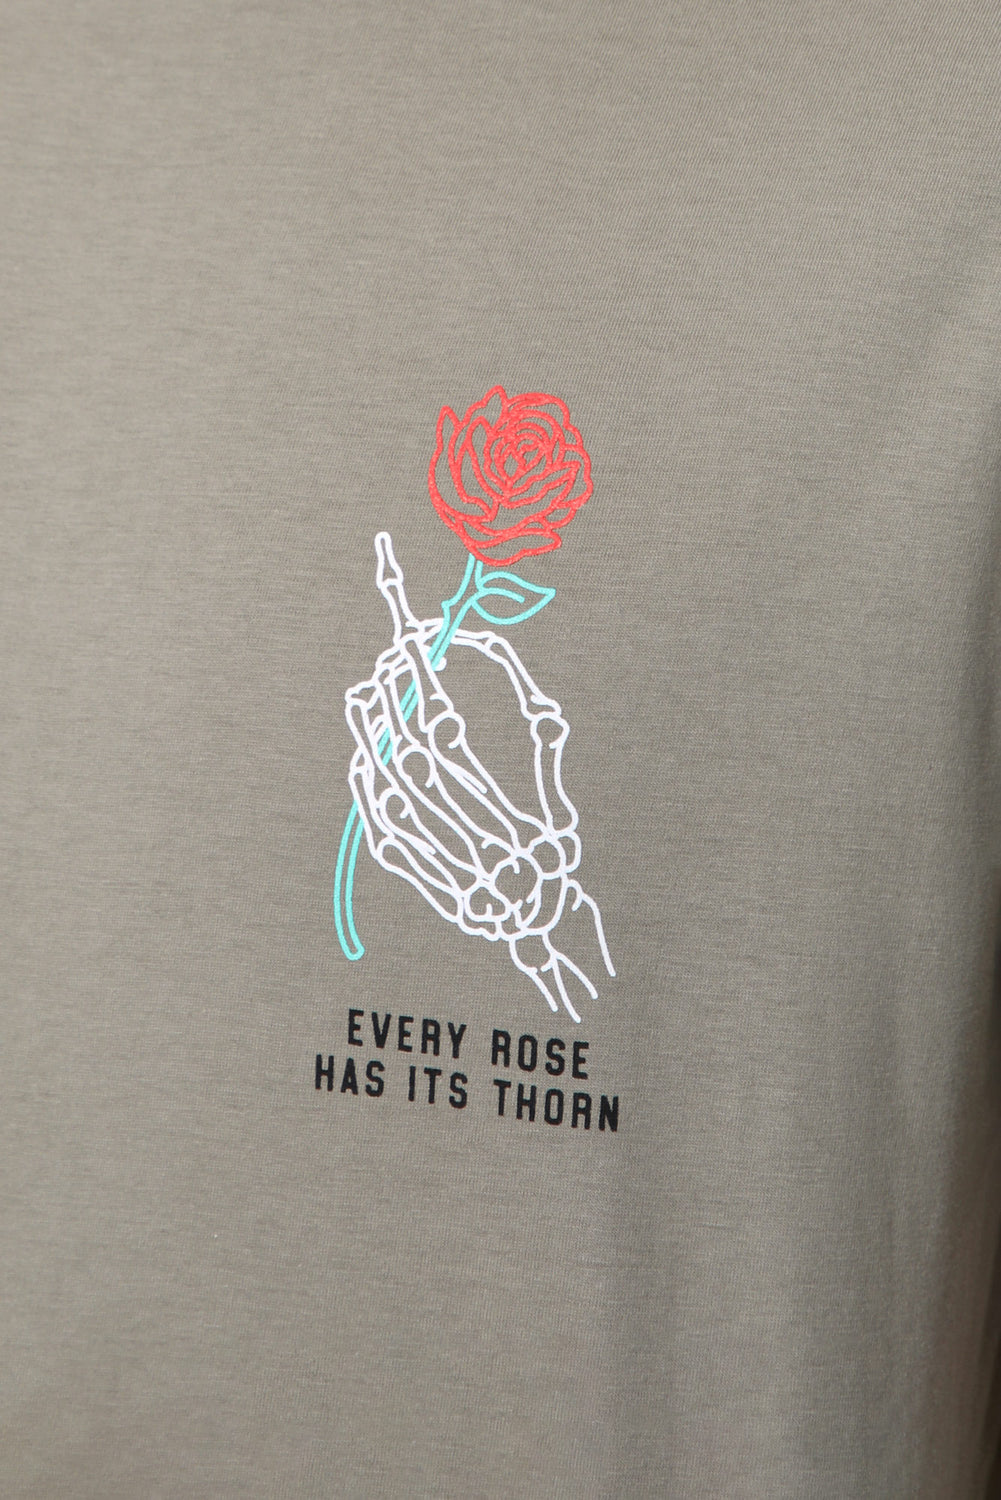 T-Shirt Imprimé Every Rose Has Its Thorn Arsenic Homme T-Shirt Imprimé Every Rose Has Its Thorn Arsenic Homme